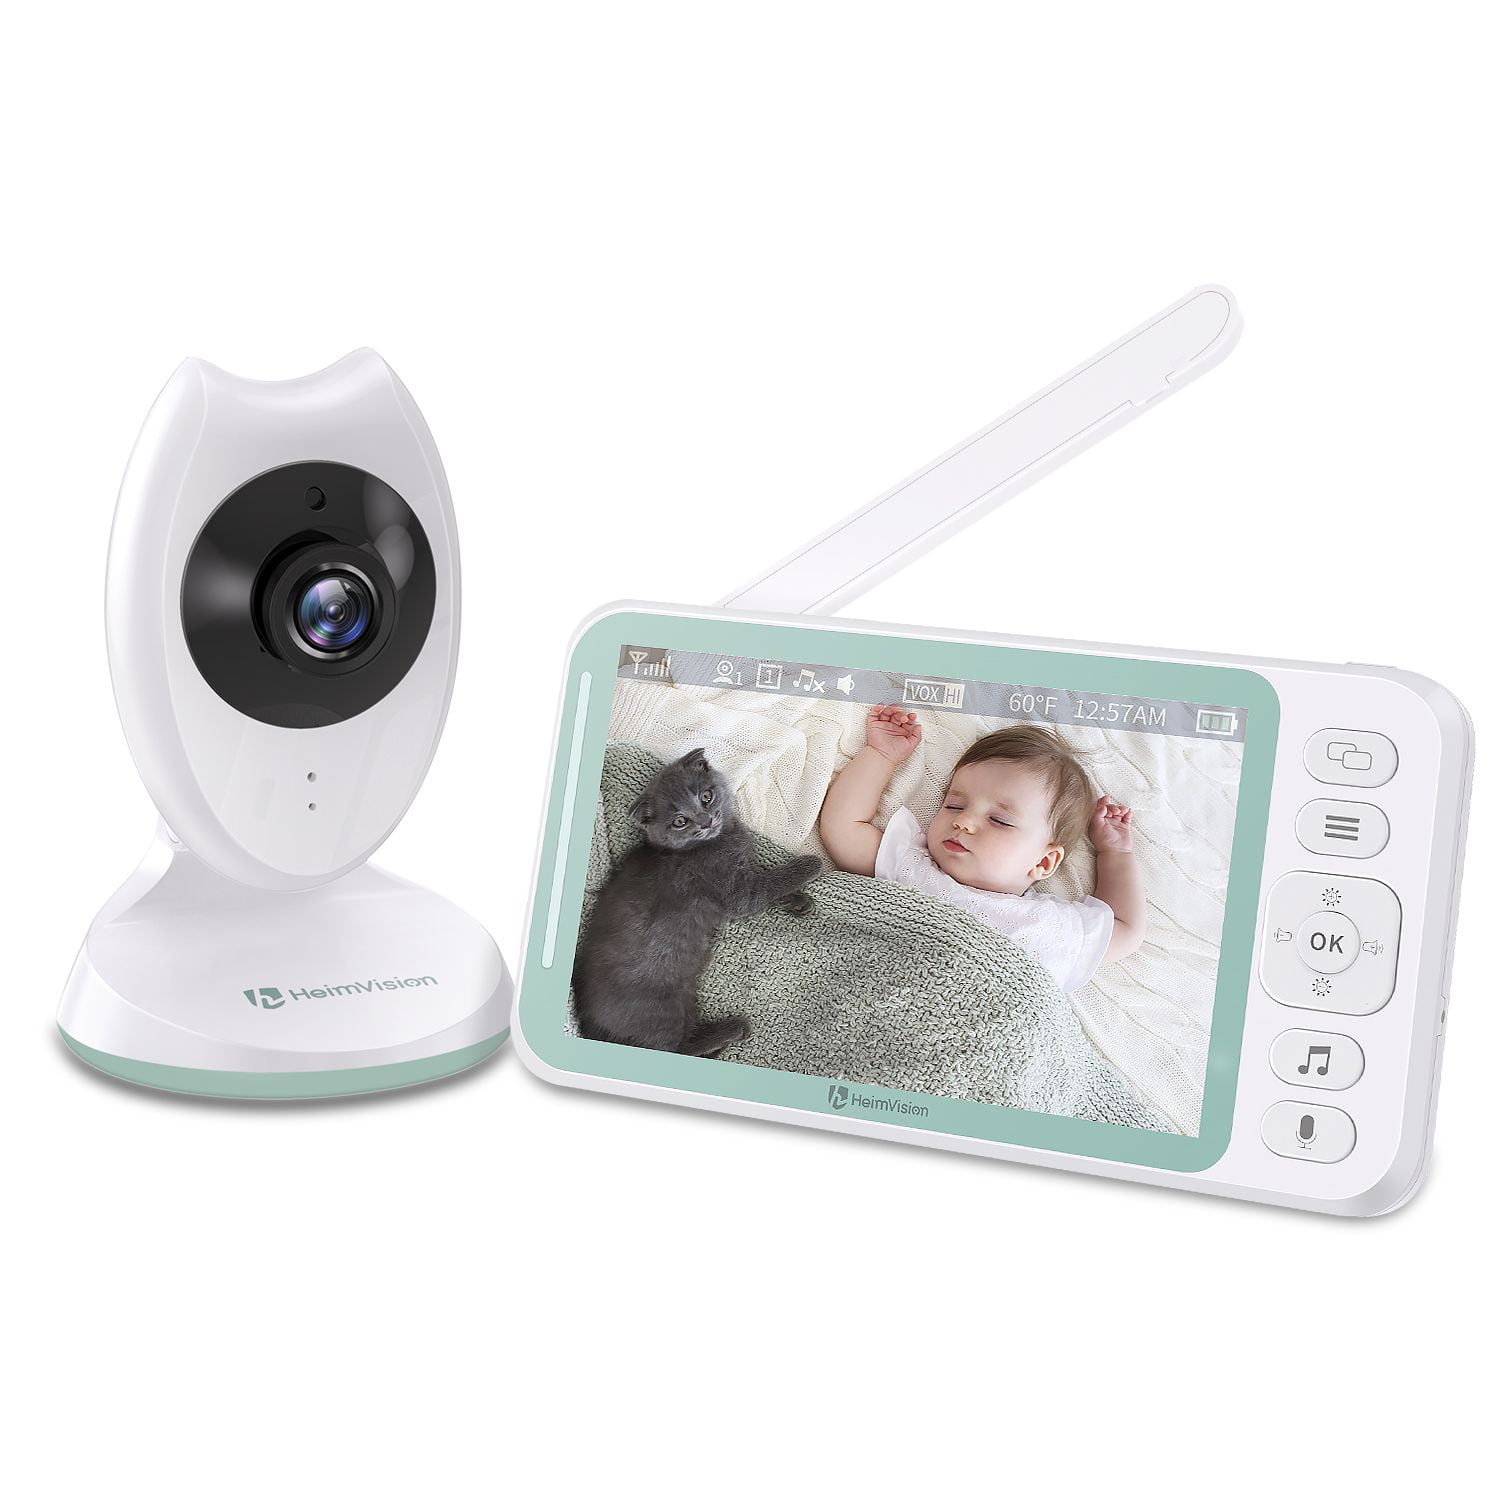 HM132 Video Baby Monitor with Camera and Audio Extra Lens and Holder Included 8 Lullabies HeimVision Baby Monitor 2 Way Talk 4.3 Split Screen Baby Camera with Night Vision VOX Mode